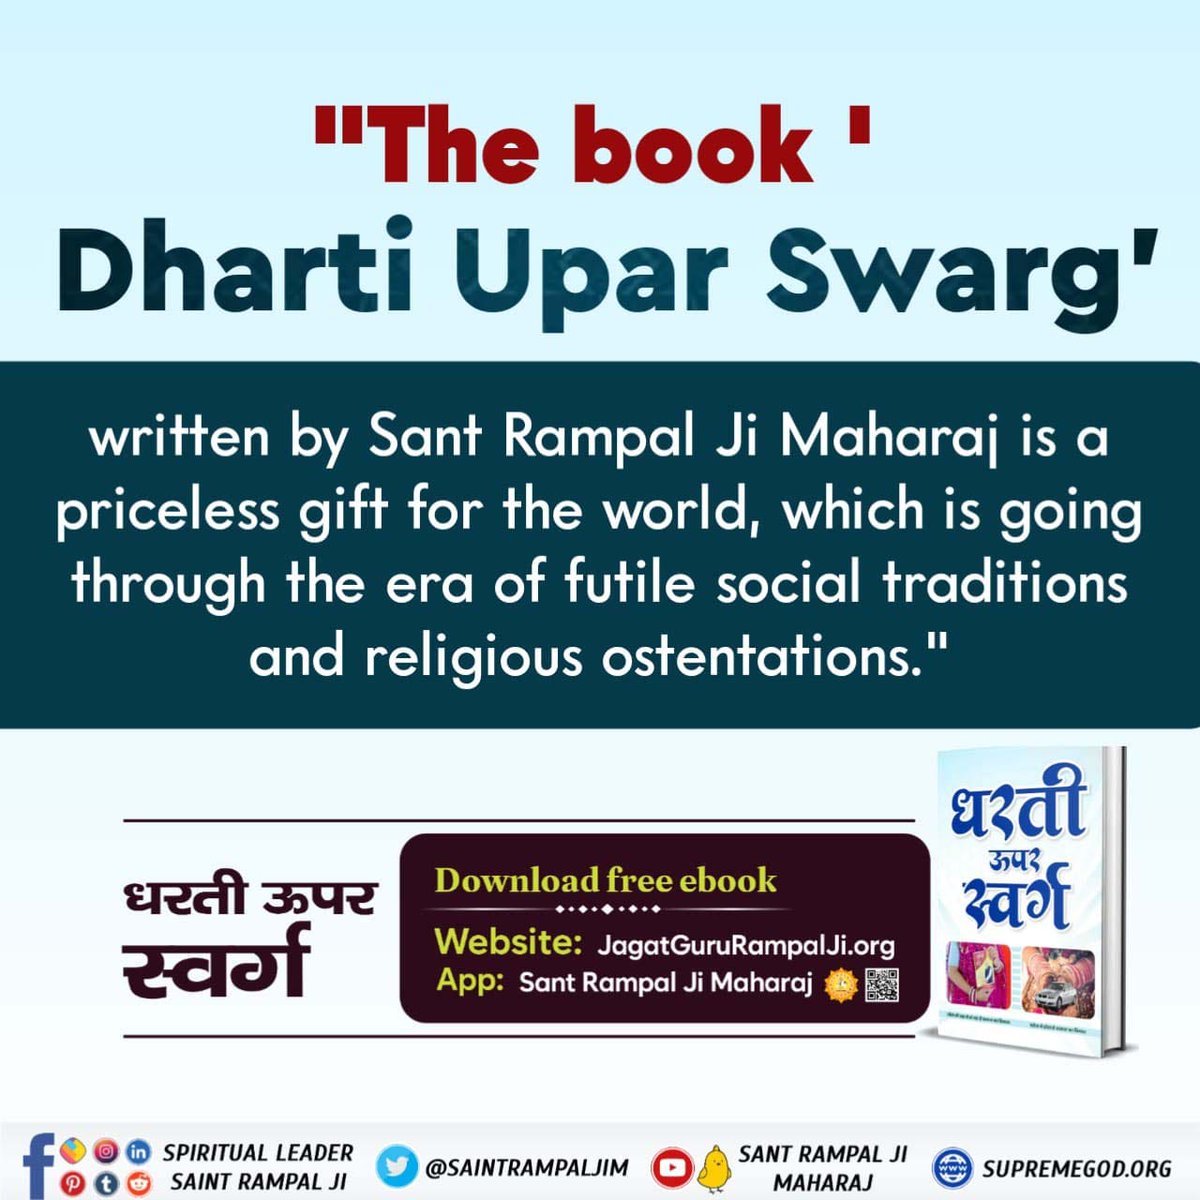 #GodMorningTuesday
'The book ' Dharti Upar Swarg'
written by Sant Rampal Ji Maharaj is a priceless gift for the world, which is going through the era of futile social traditions and religious ostentations.'
#धरती_को_स्वर्ग_बनाना_है